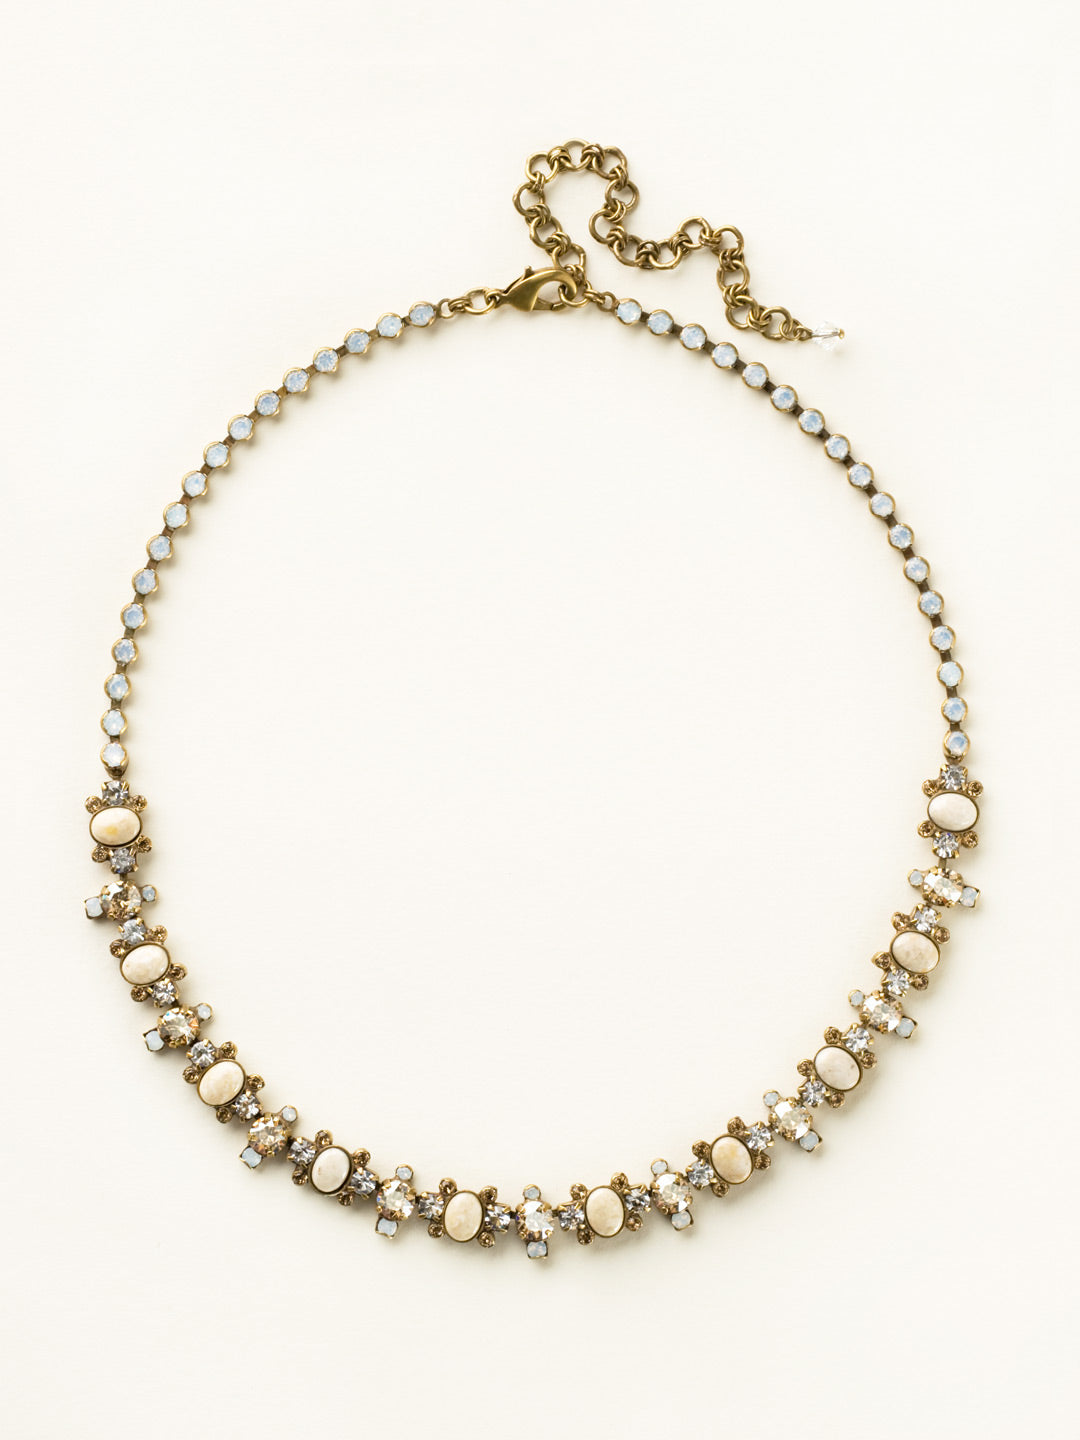 Semi-Precious Oval and Crystal Cluster Line Necklace - NDA8AGRIV - Clusters of crystals alternate between semi-precious oval stones in this classic line necklace. Rhinestone chain completes this design for all around sparkle!Due to the nature of natural, semi-precious stones, variations in color and pattern may occur. These variations make each Sorrelli piece one-of-a-kind!